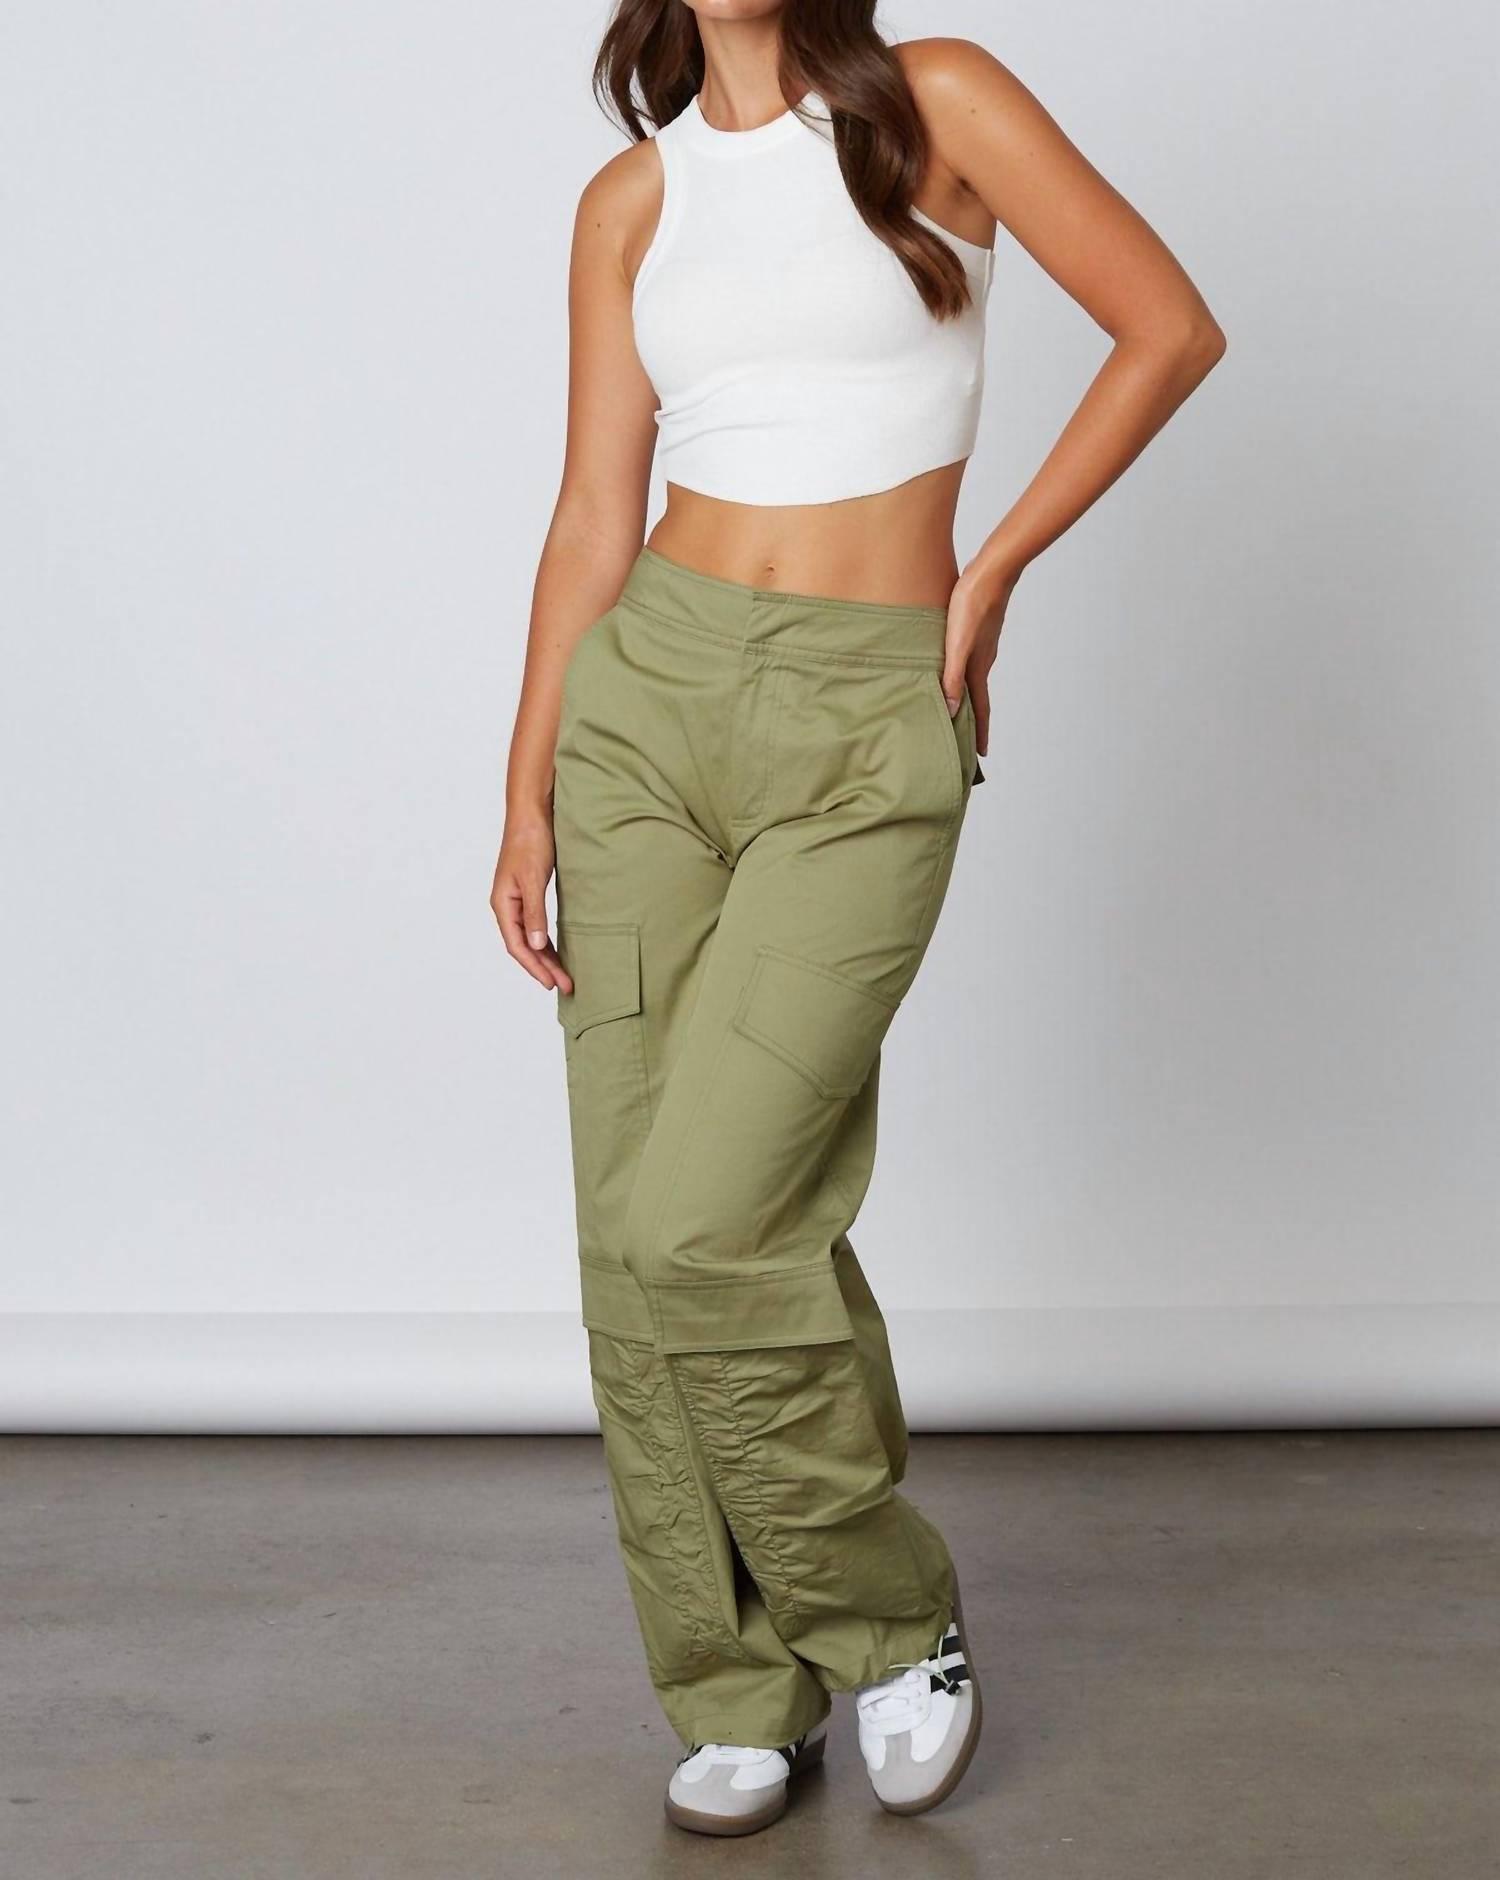 RAPTOR MILITARY STYLE WOMENS CARGO PANTS IN GREEN ARMY WITH STUDS AND  CRYSTALS